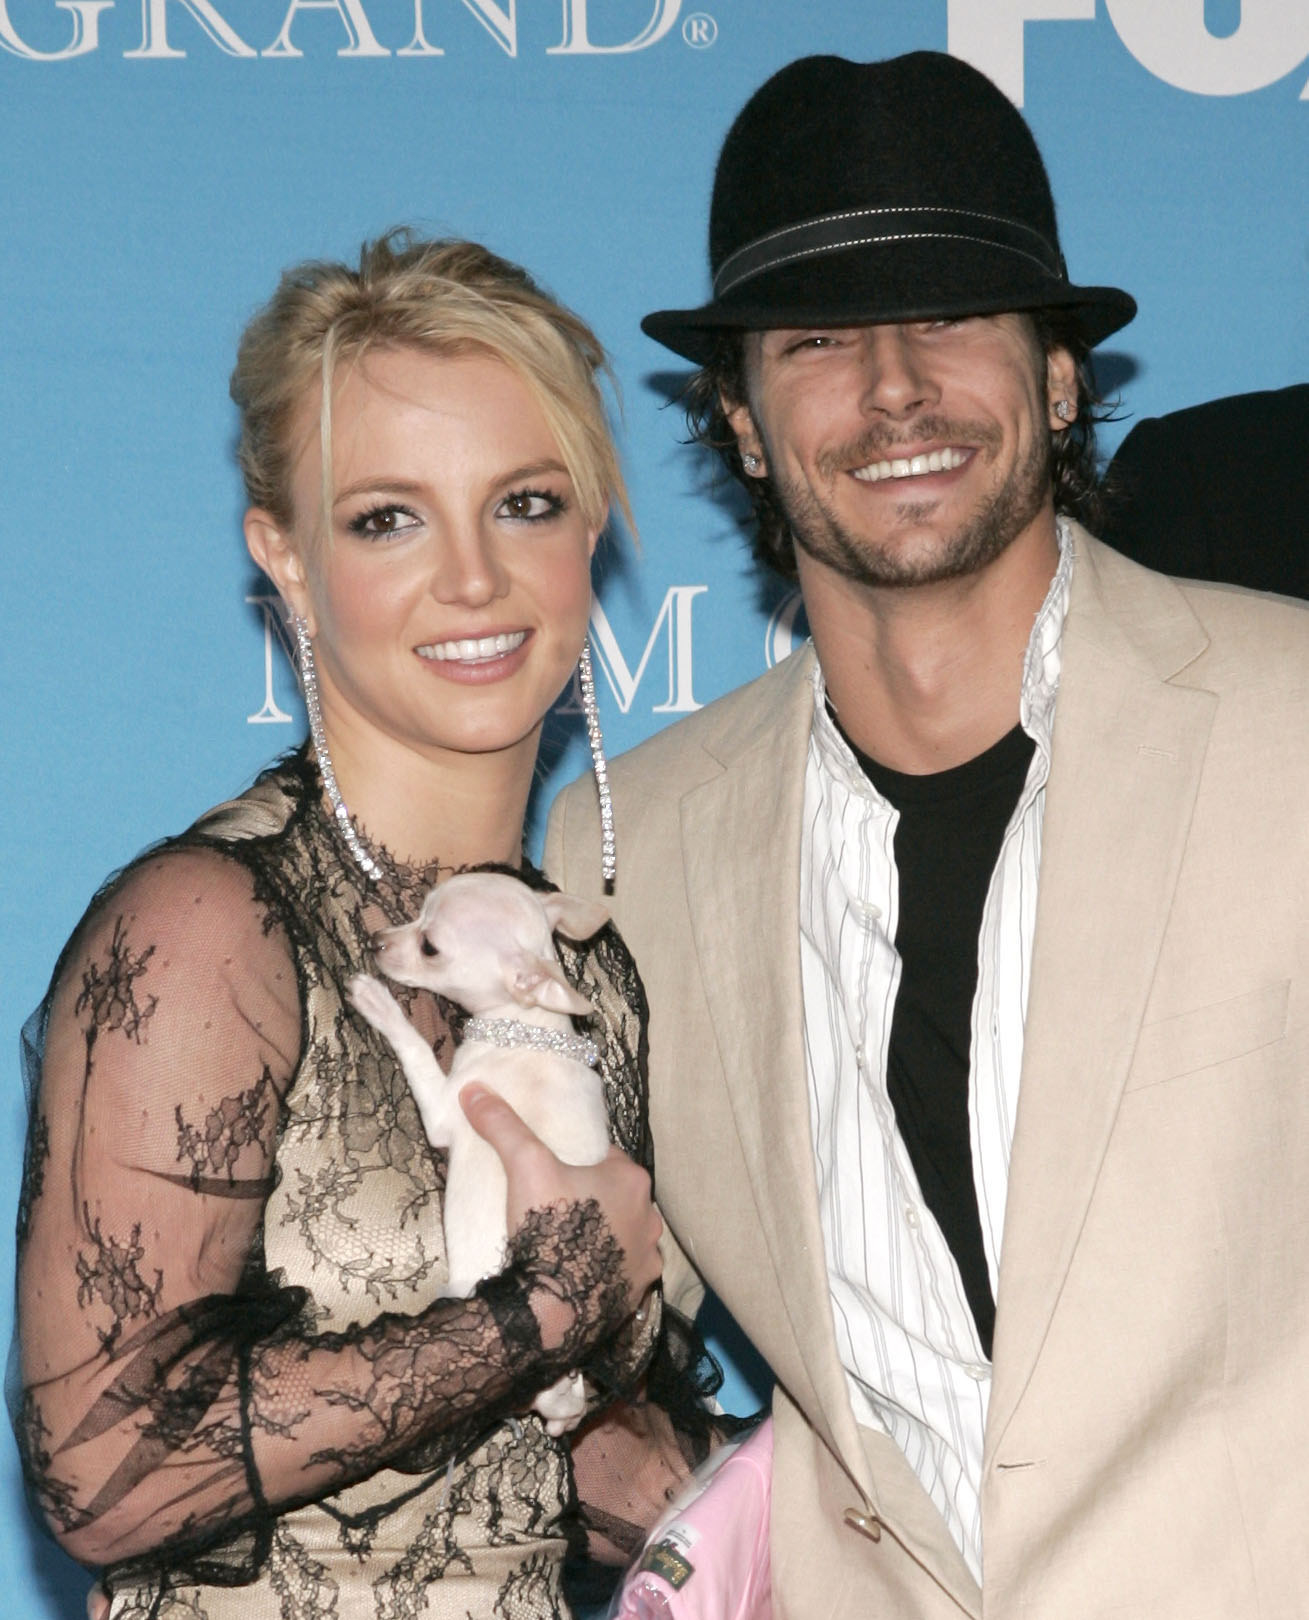 Britney Spears and Kevin Federline during 2004 Billboard Music Awards - Arrivals at MGM Grand in Las Vegas, Nevada